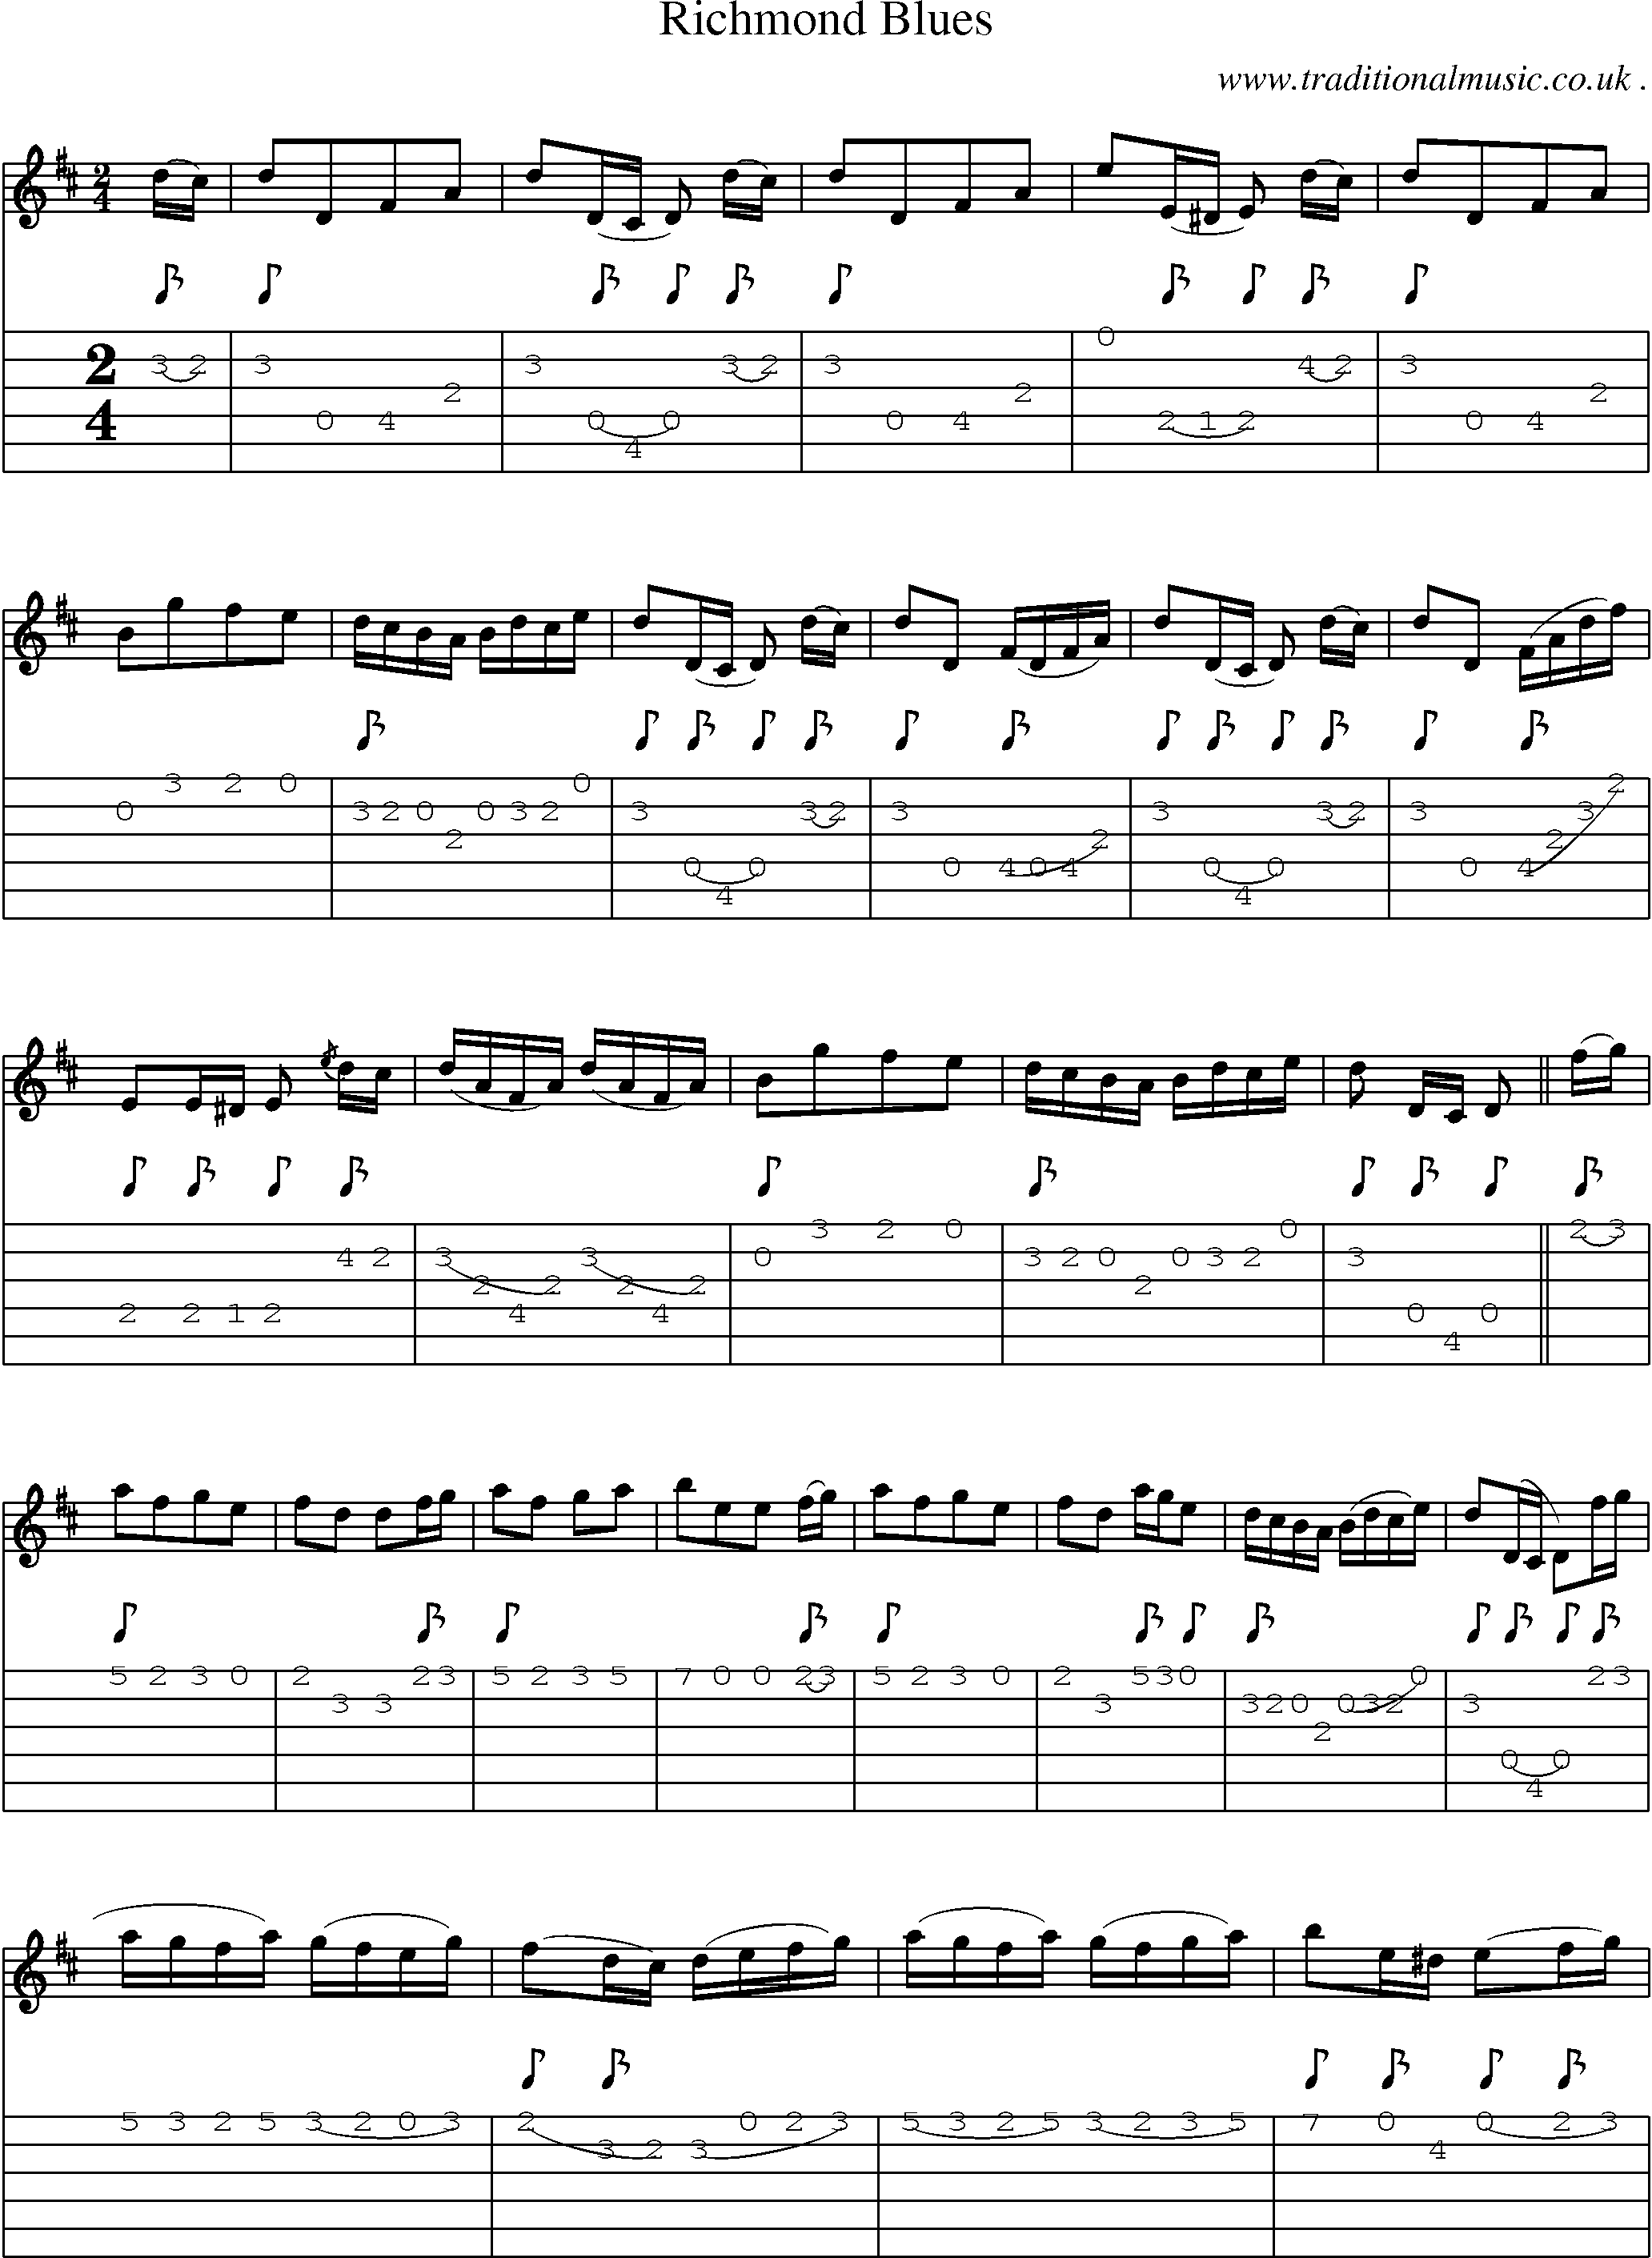 Music Score and Guitar Tabs for Richmond Blues